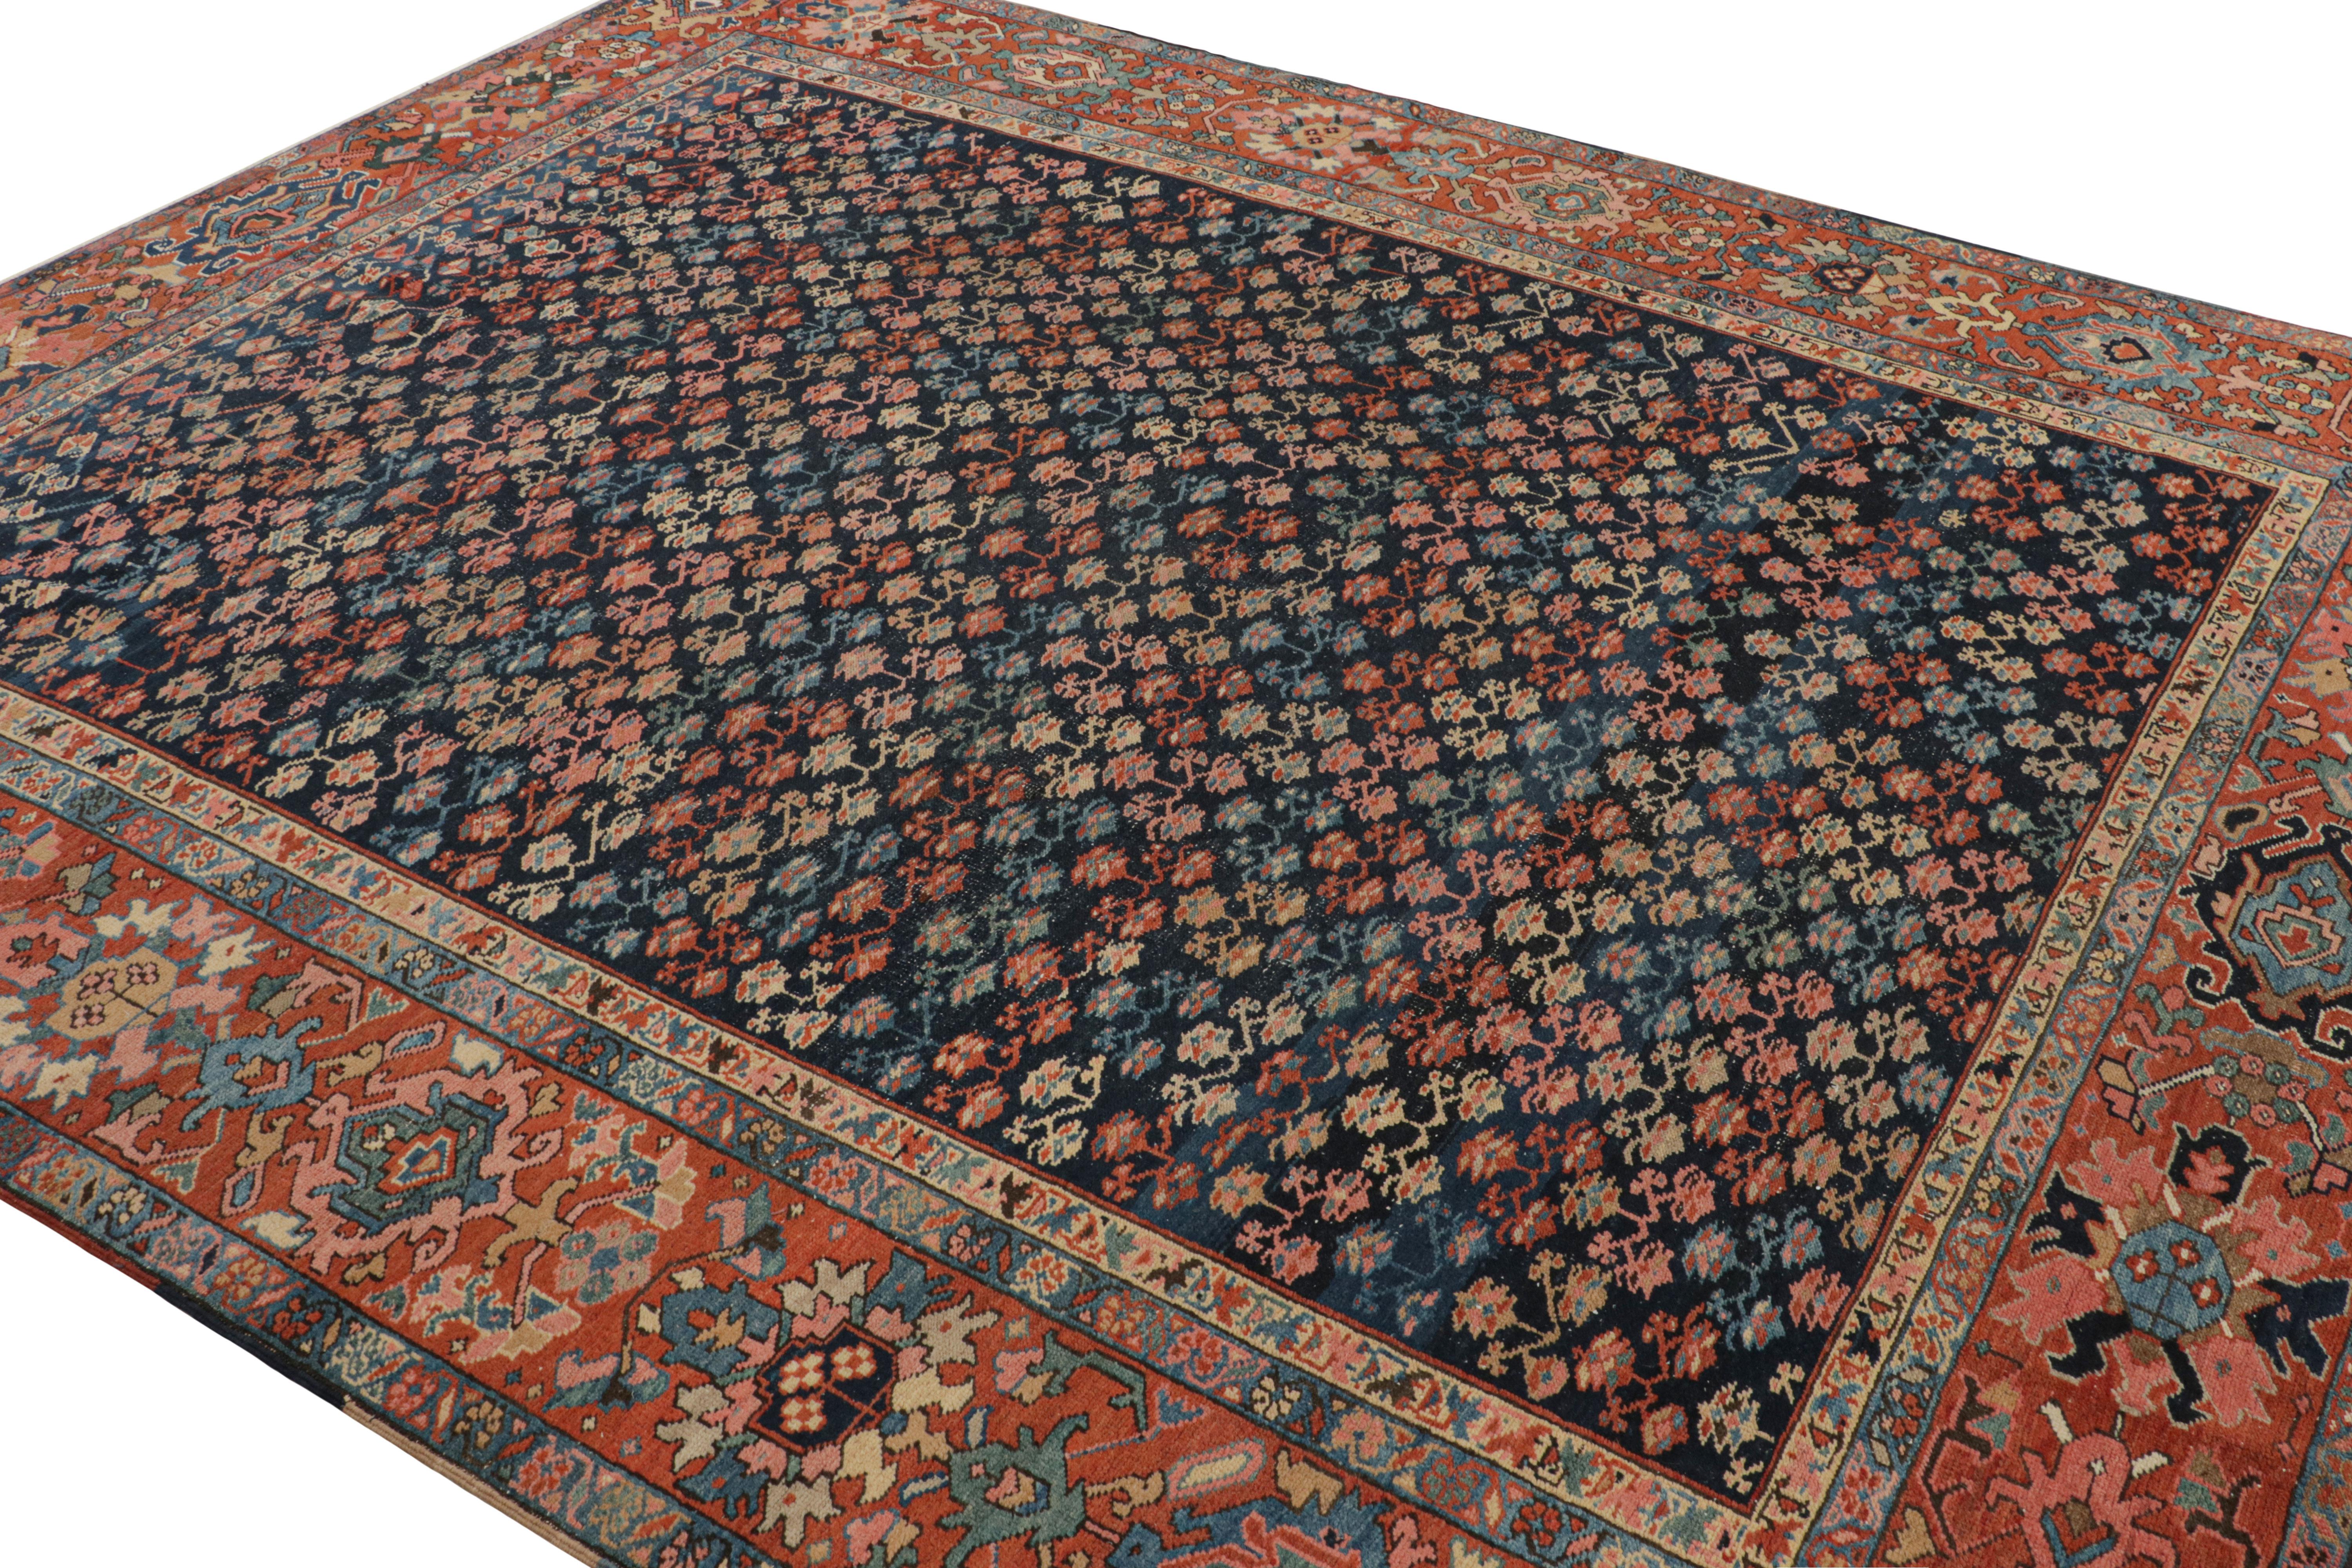 Hand-knotted in wool, this 8x10 rug, originating from Persia, circa 1920-1930, is a very special antique Persian Bakshaish piece with all-over geometric floral patterns. 
 
On the Design: 

This is a rare masterpiece from one of the most celebrated